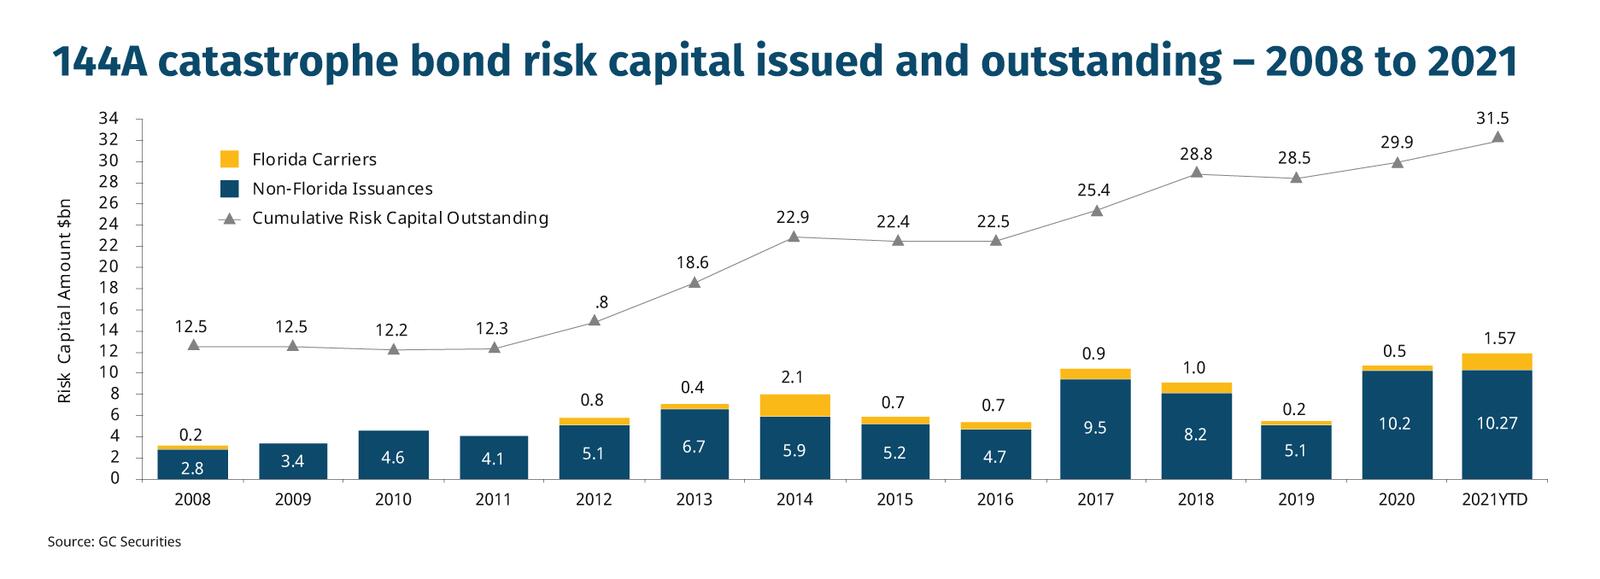 144A catastrophe bond risk capital issued and outstanding – 2008 to 2021